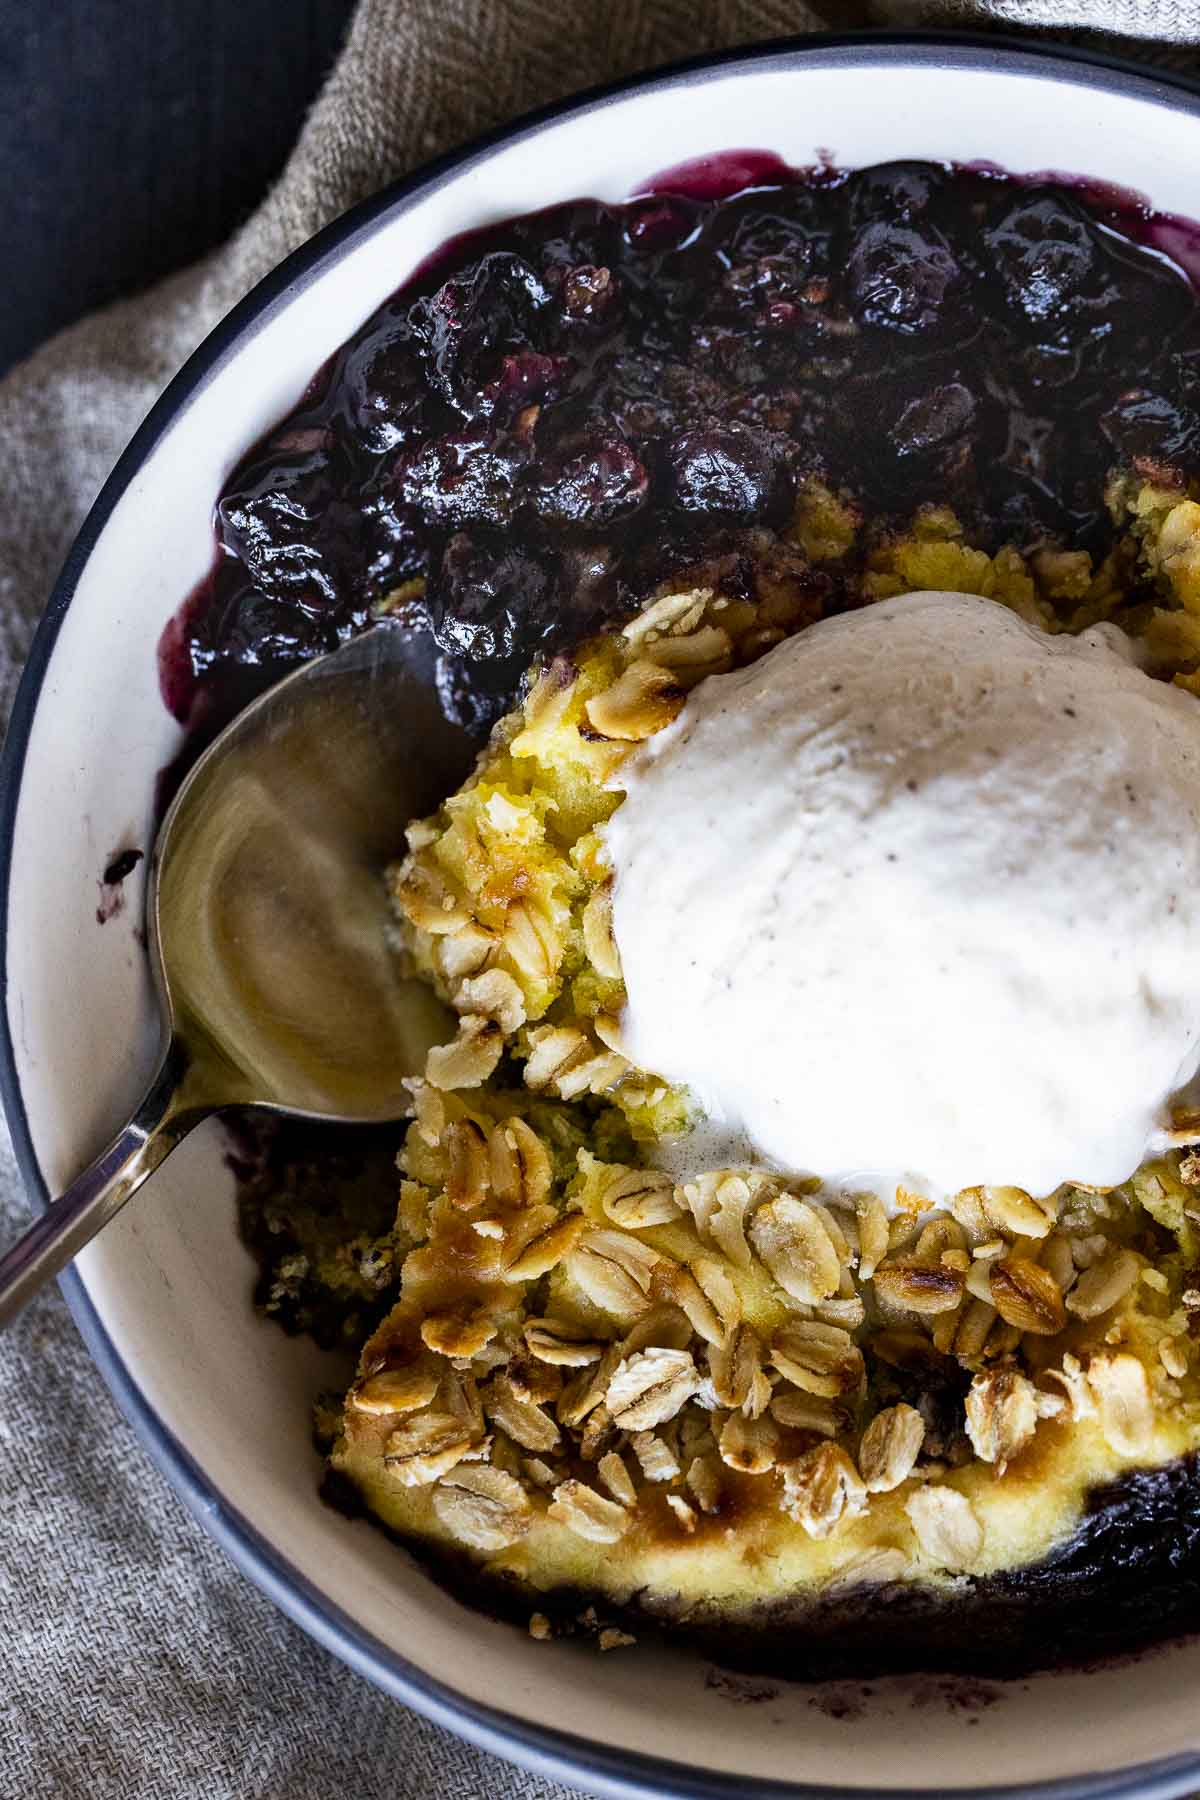 Overhead view of blueberry cobbler topped with ice cream and a large serving spoon inserted into it.